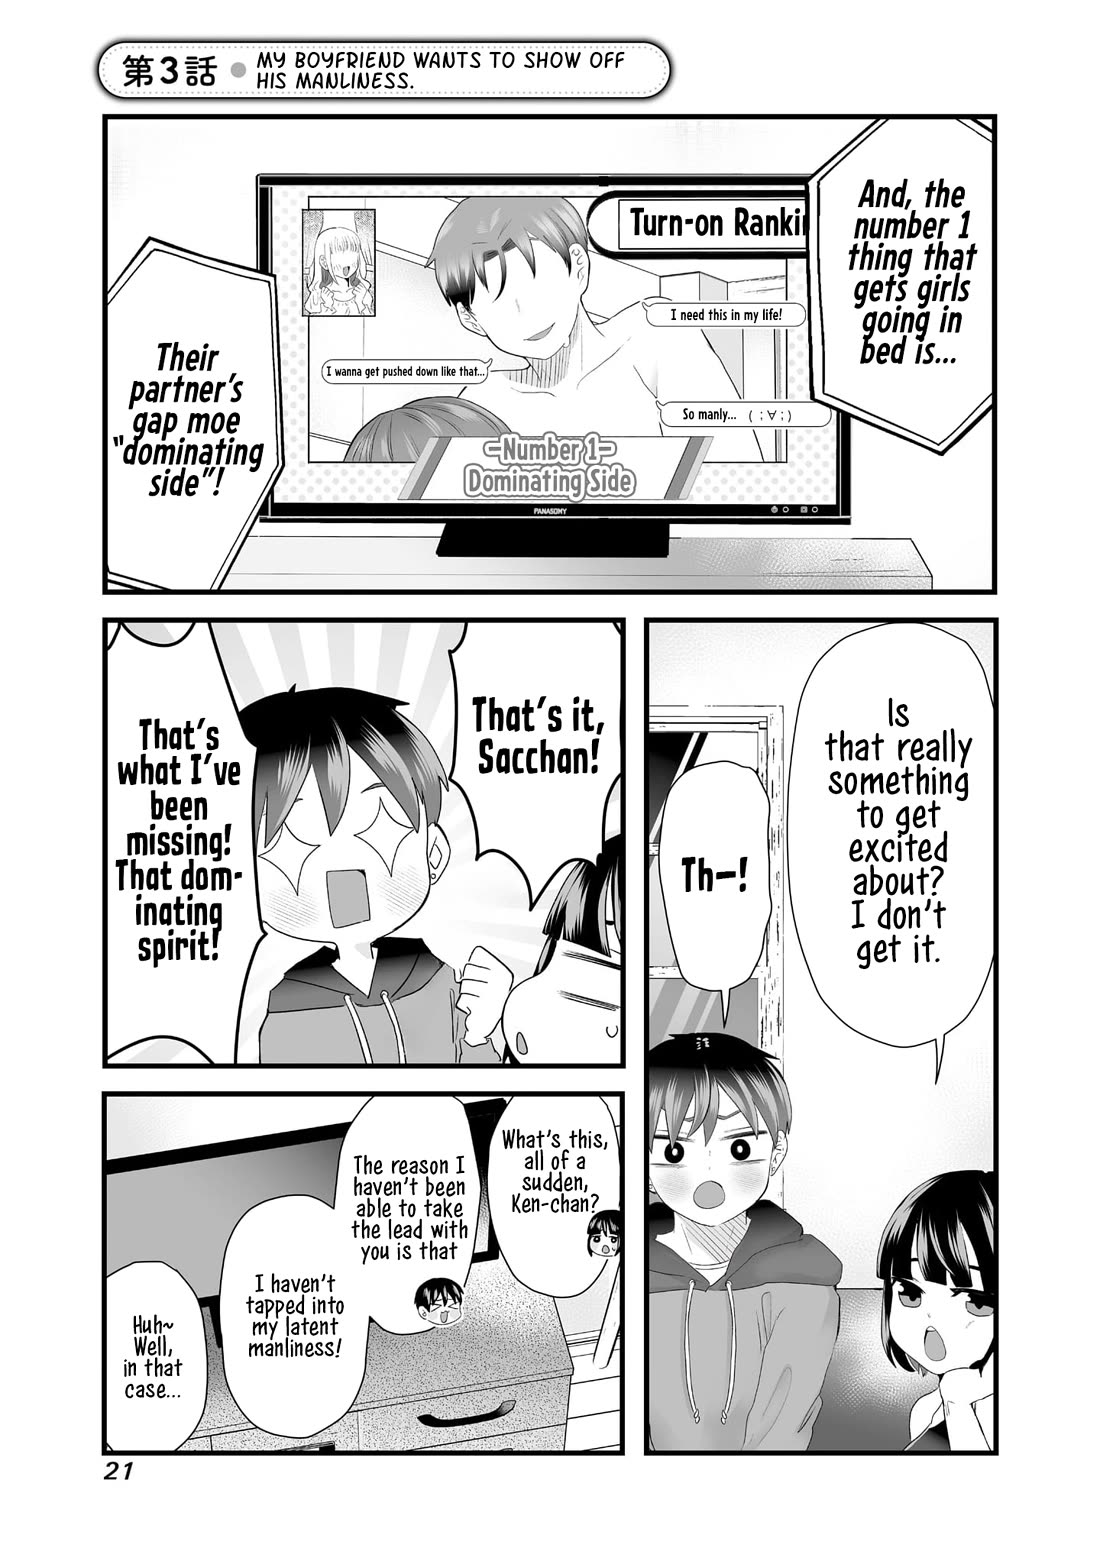 Sacchan and Ken-chan Are Going at it Again - chapter 3 - #1